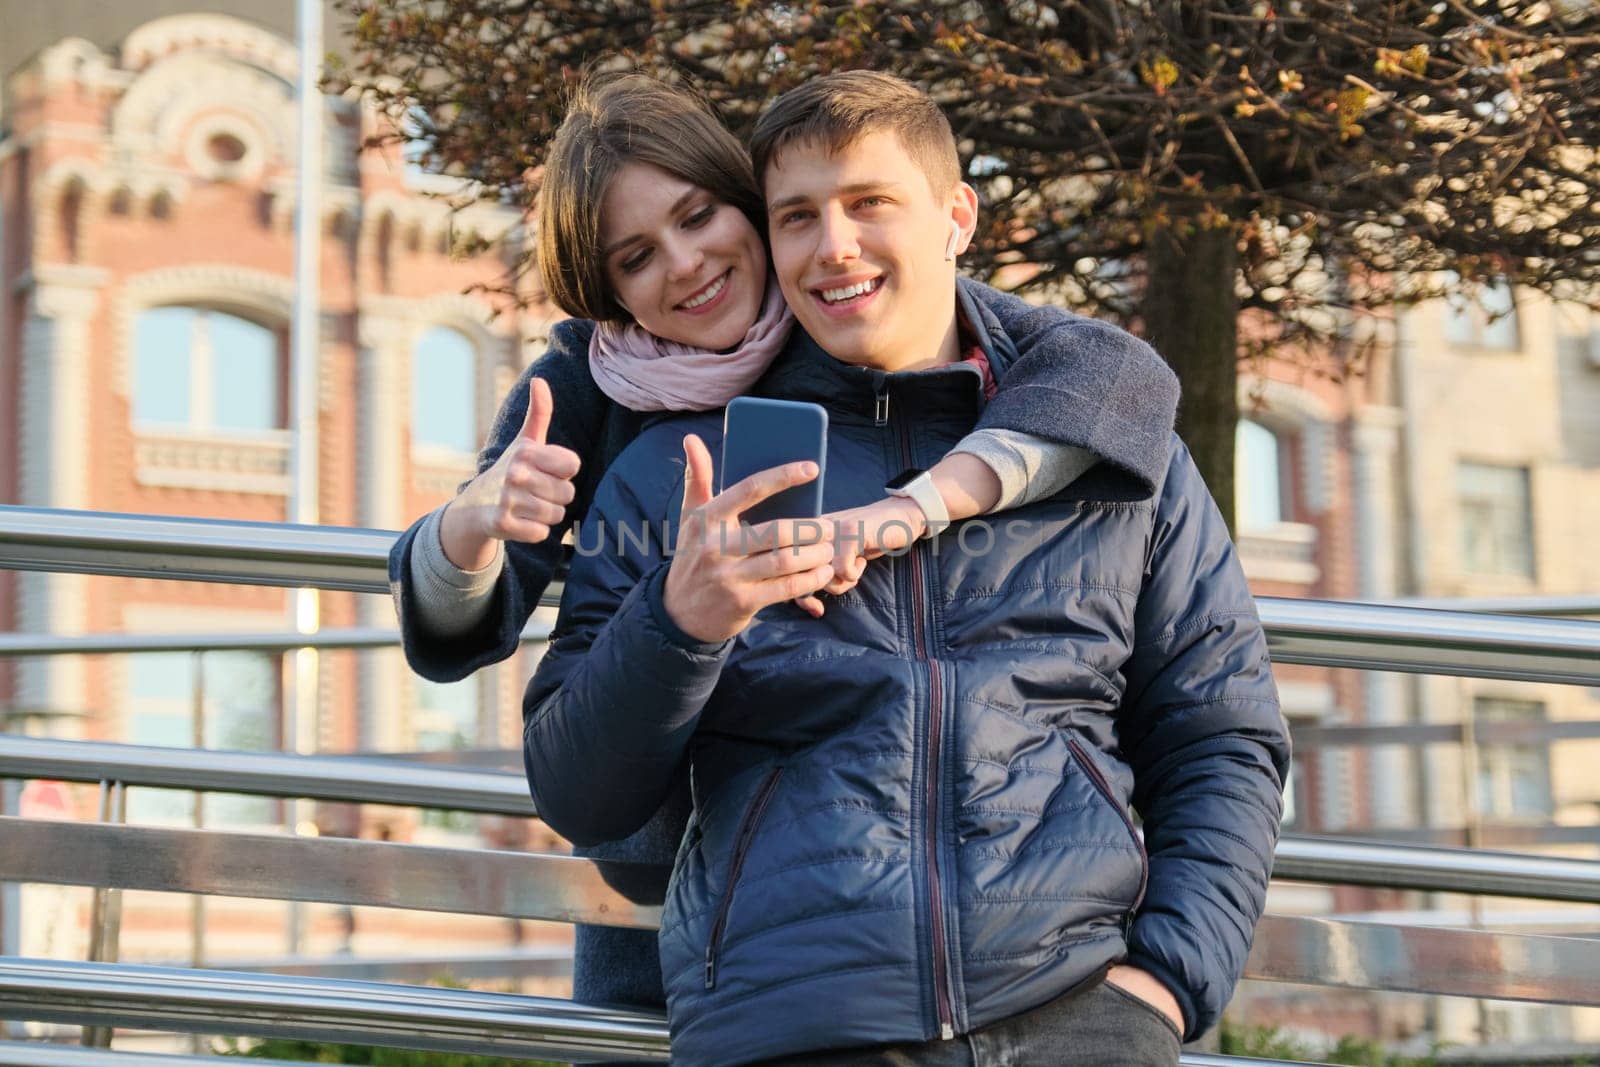 Outdoor portrait of couple showing gesture sign ok. Young man and woman with smartphone in headphones, city background golden hour.